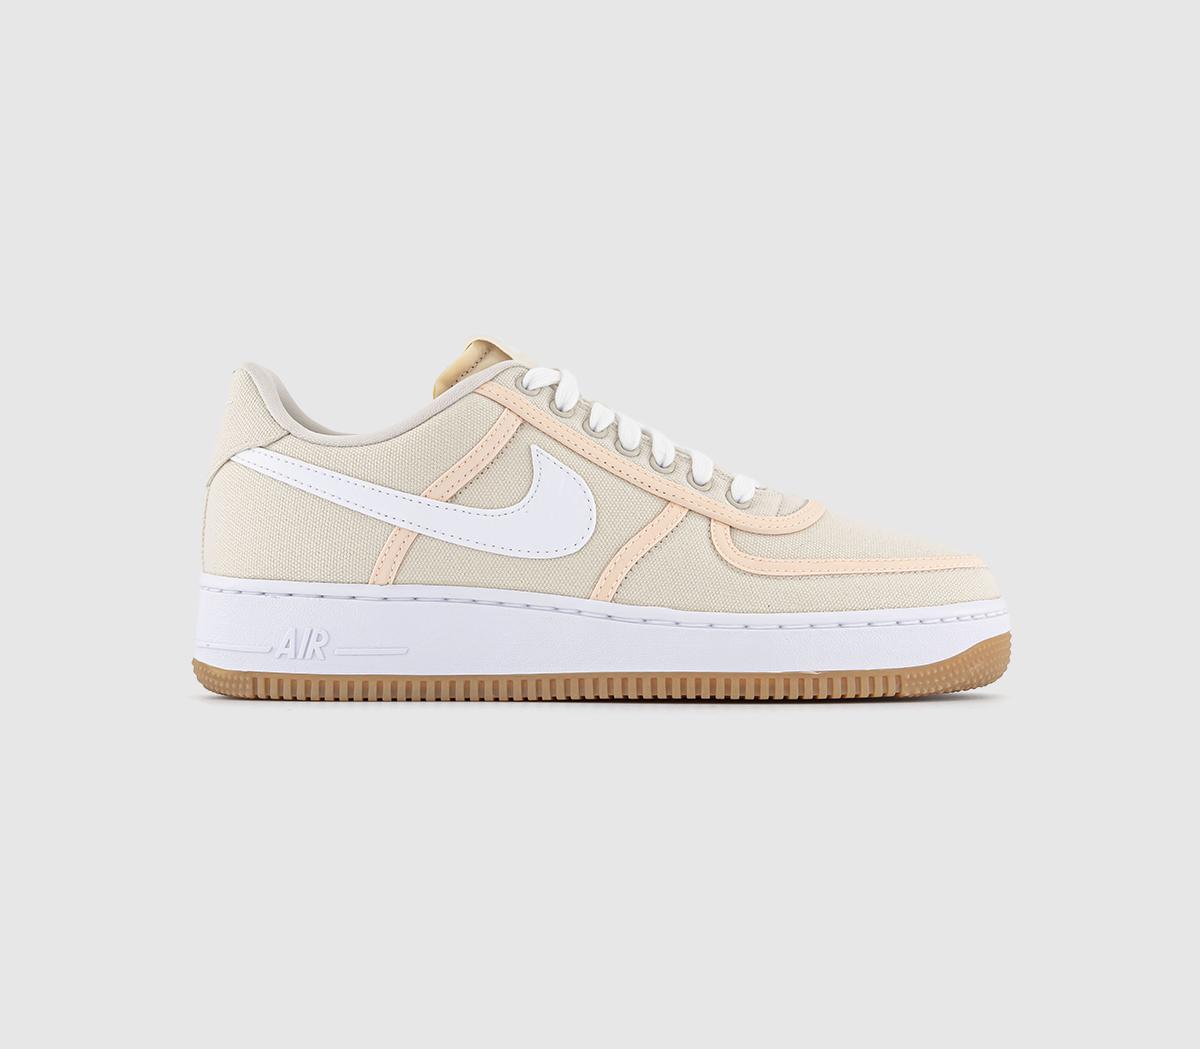 Nike Air Force 1 07 Trainers Light Cream White Crimson Tint Gum Light Brown In Natural, 6.5